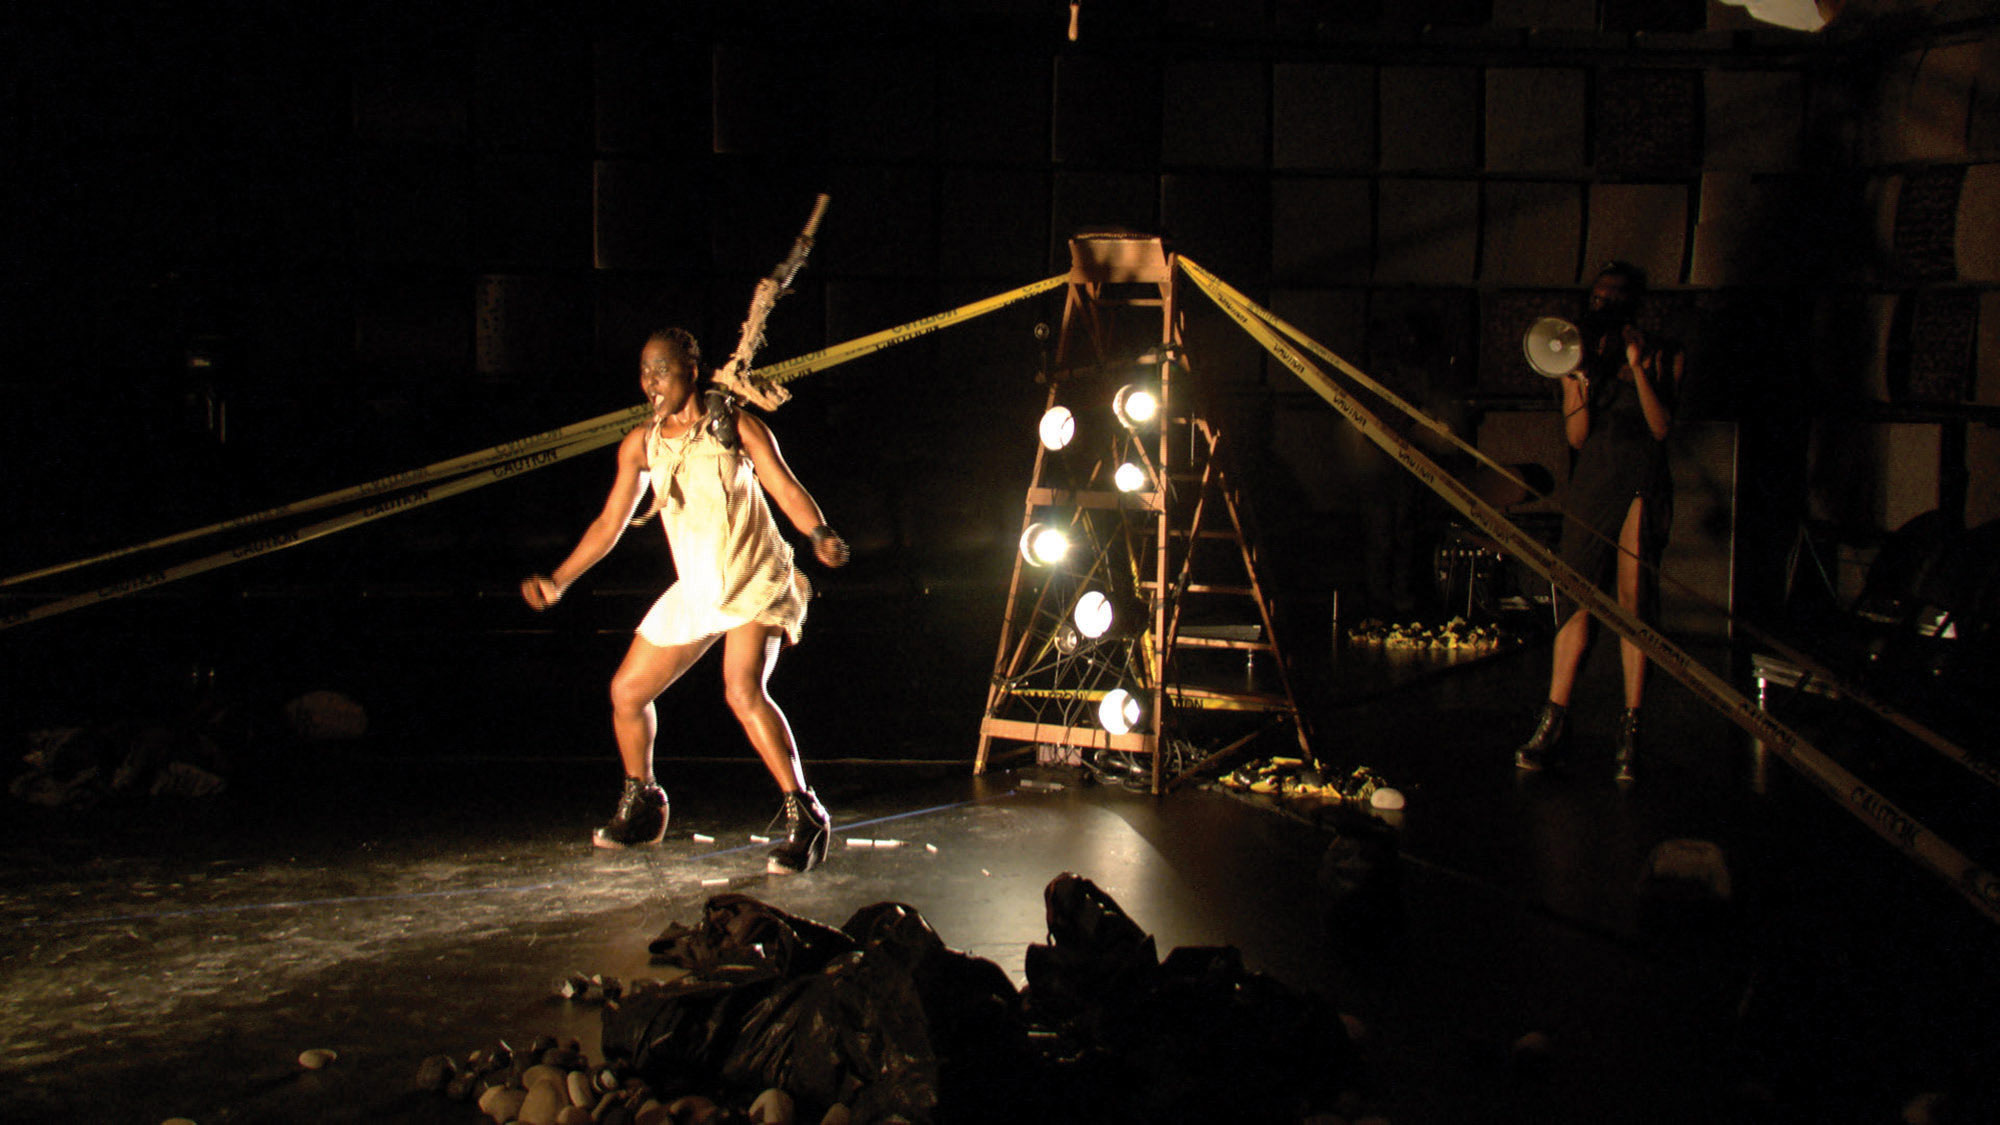 A Zimbabwean woman on a harness dancing in black box studio amongst piles of trash bags, caution tape, and a ladder with stage lights placed on the steps. 